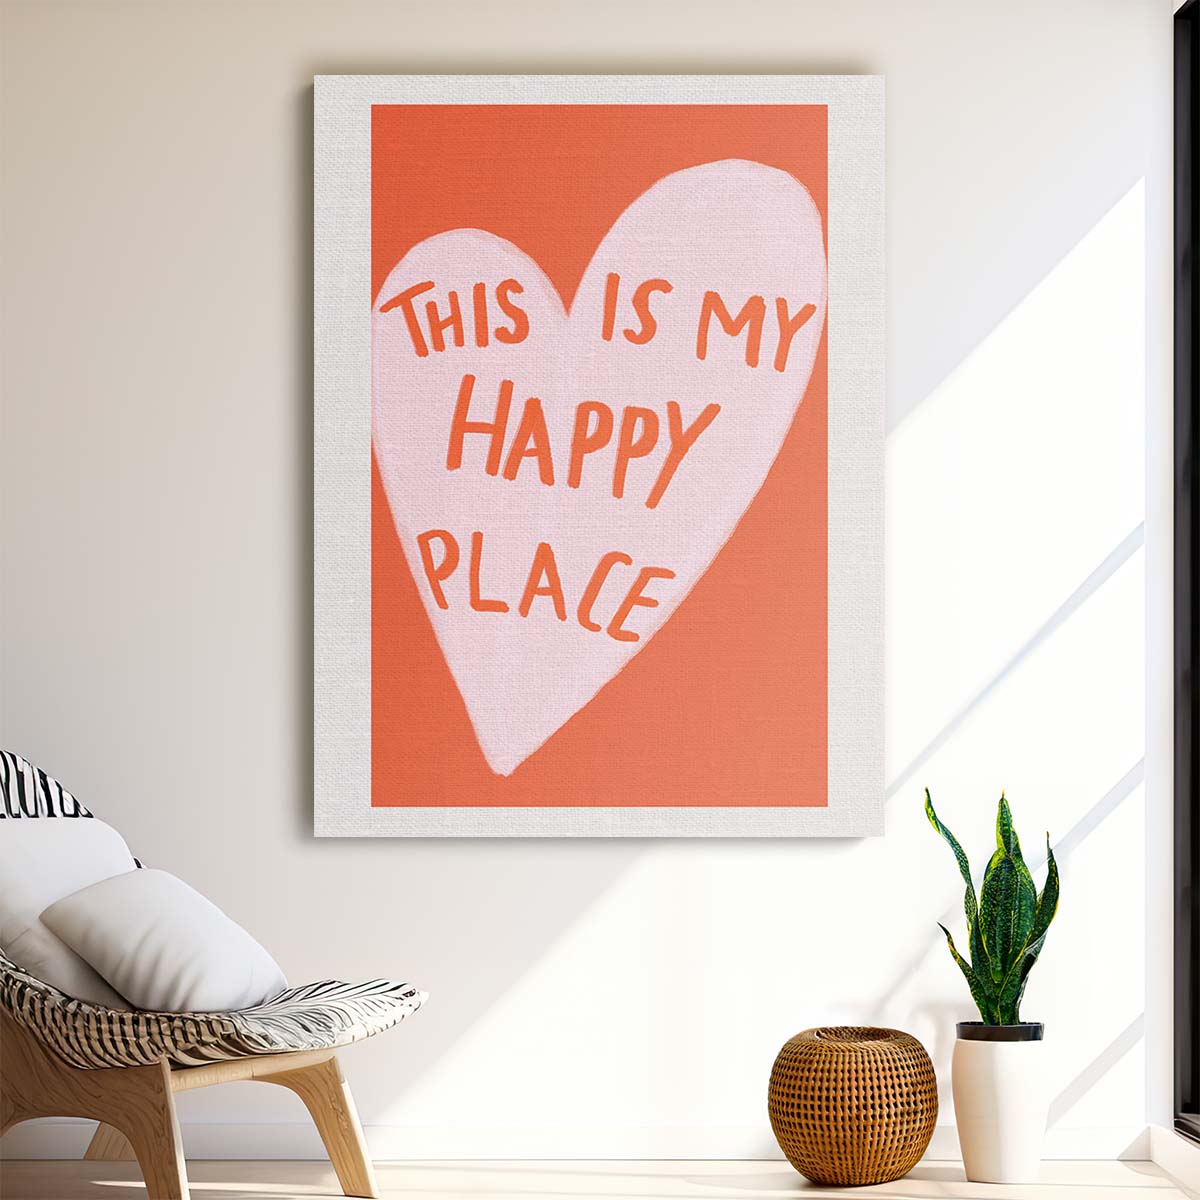 Inspirational Quote Illustration Wall Art 'My Happy Place' by Luxuriance Designs, made in USA